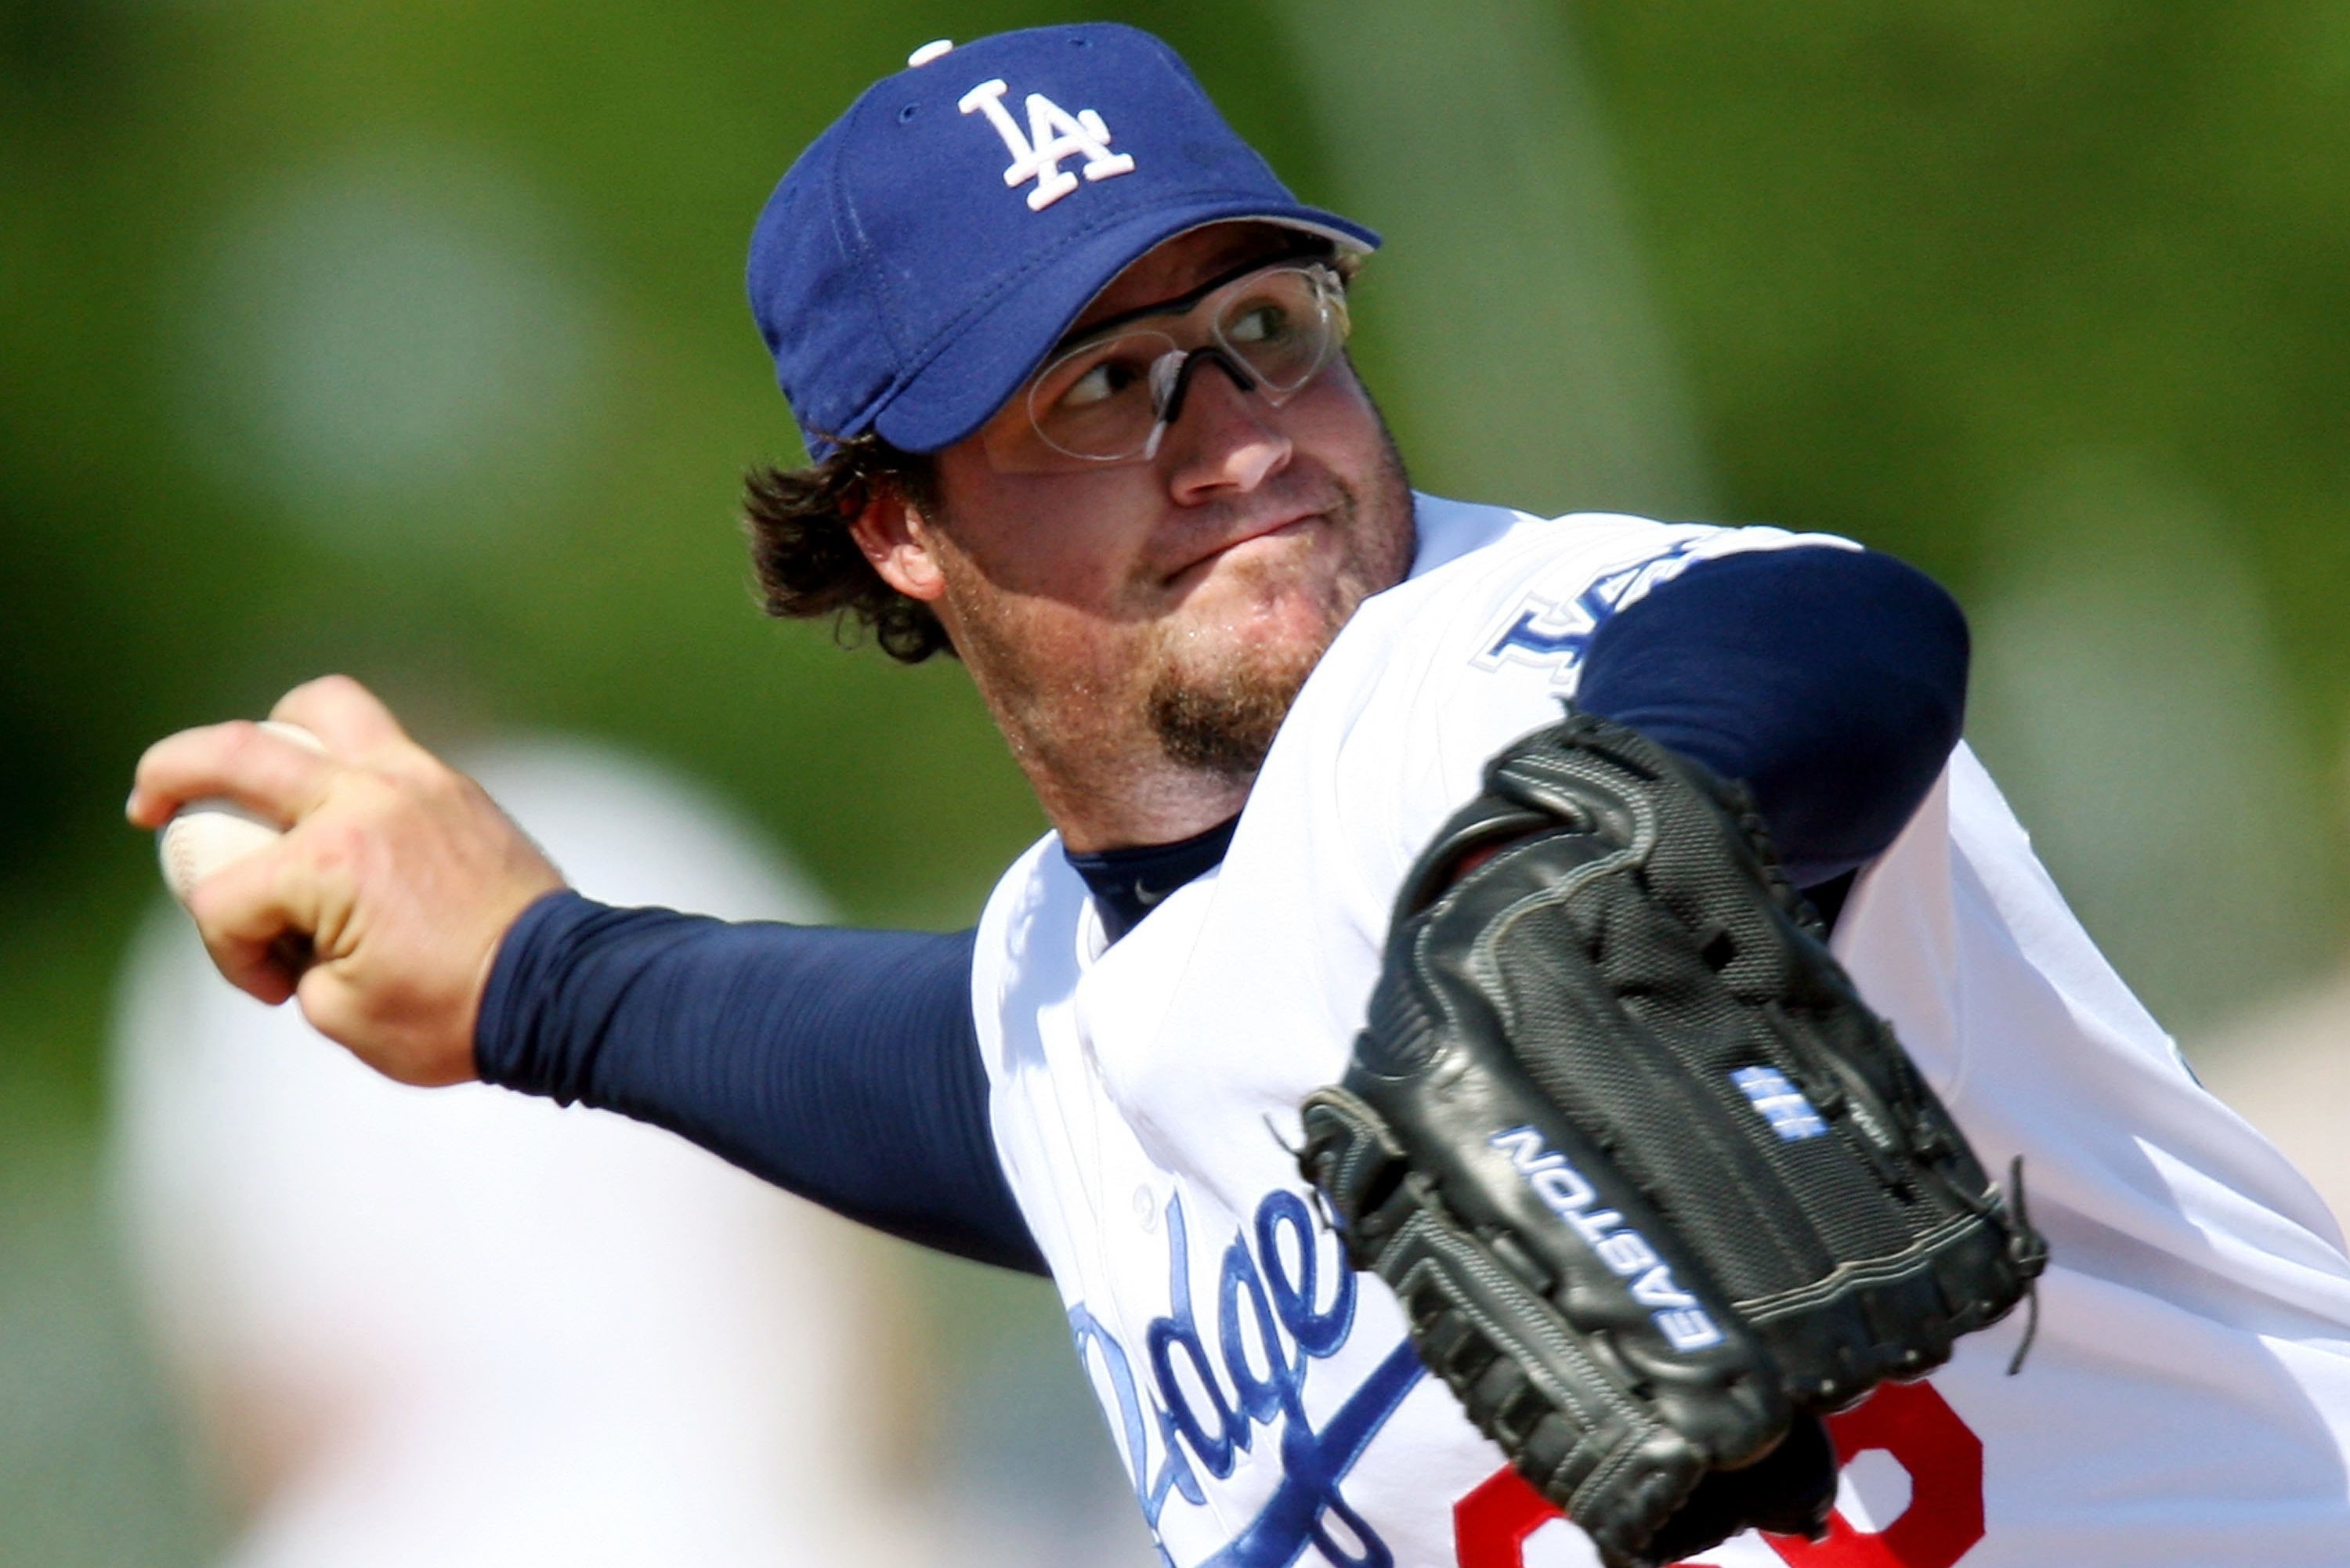 Pitcher Eric Gagne admits using HGH